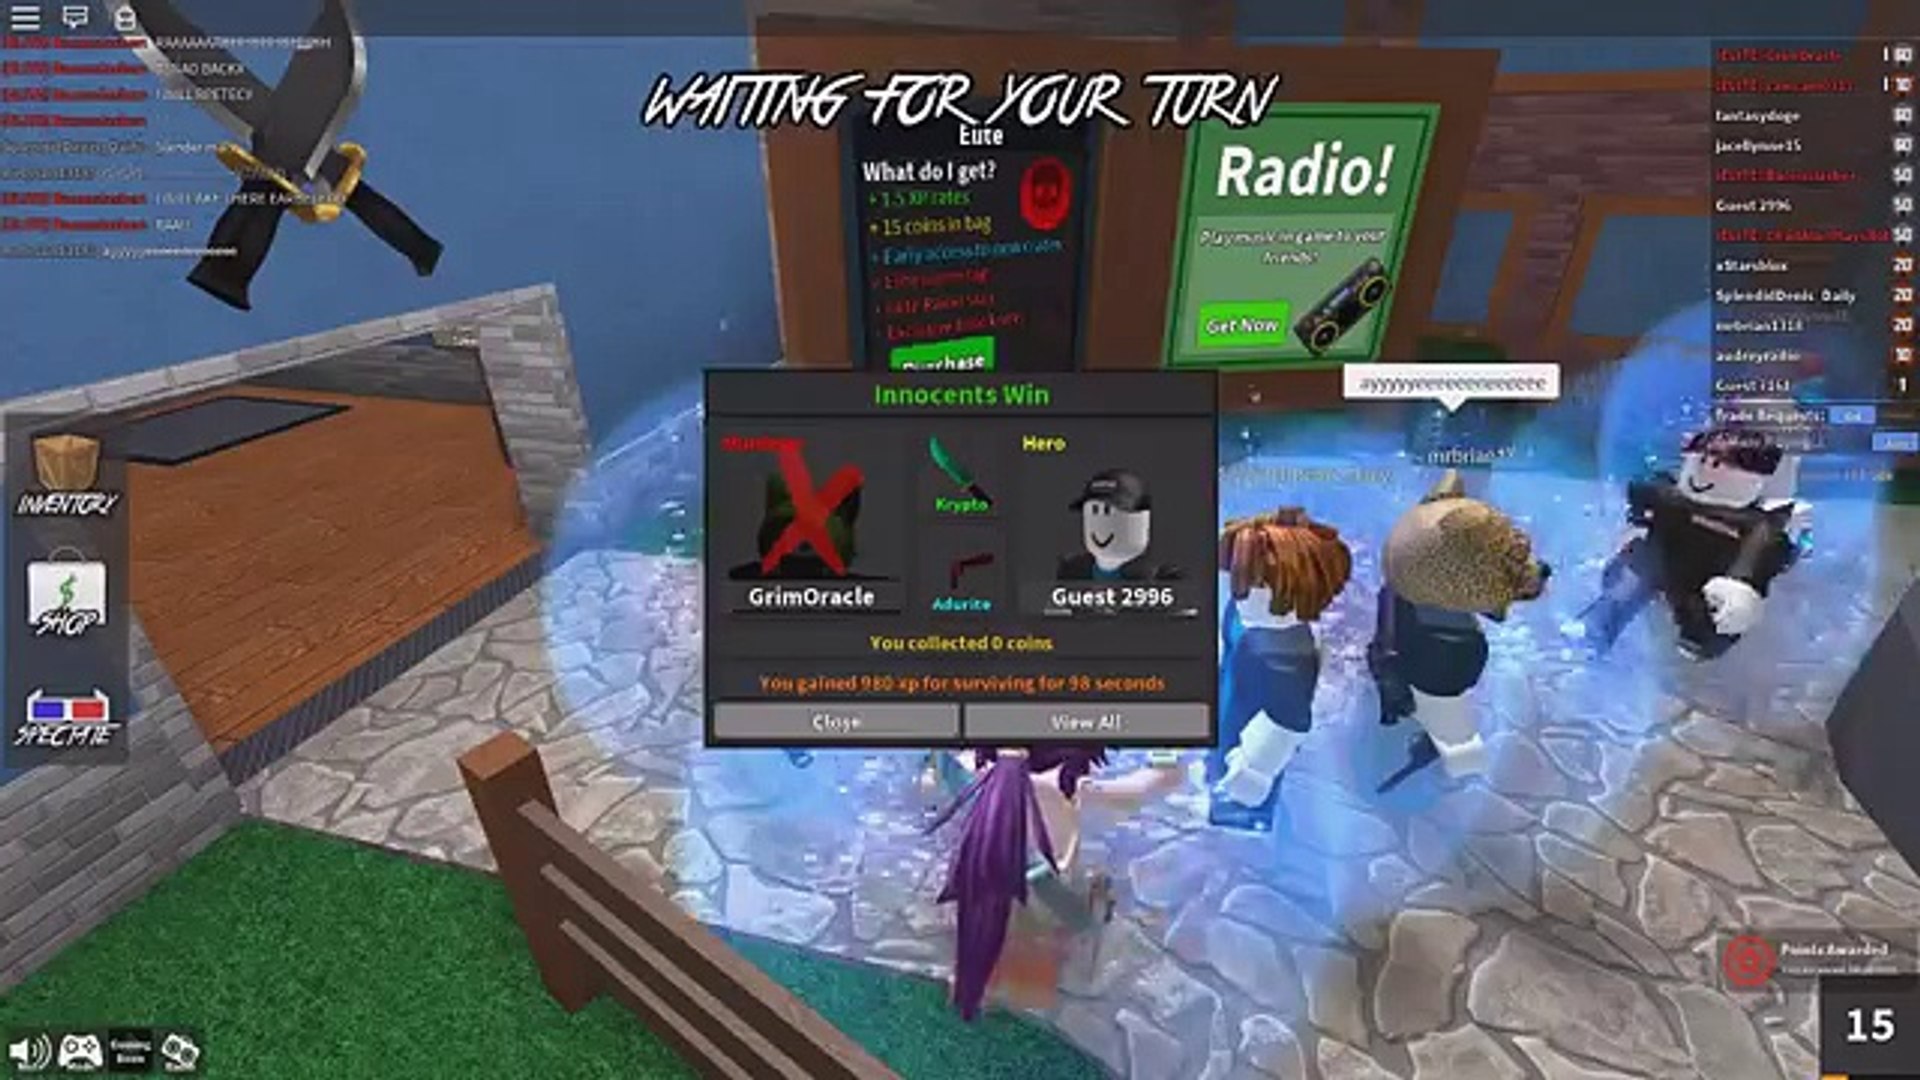 Roblox Lets Play Murder Mystery 2 Radiojh Games Gamer Chad Slg 2020 - roblox murder mystery 2 new codes 2019 august youtube